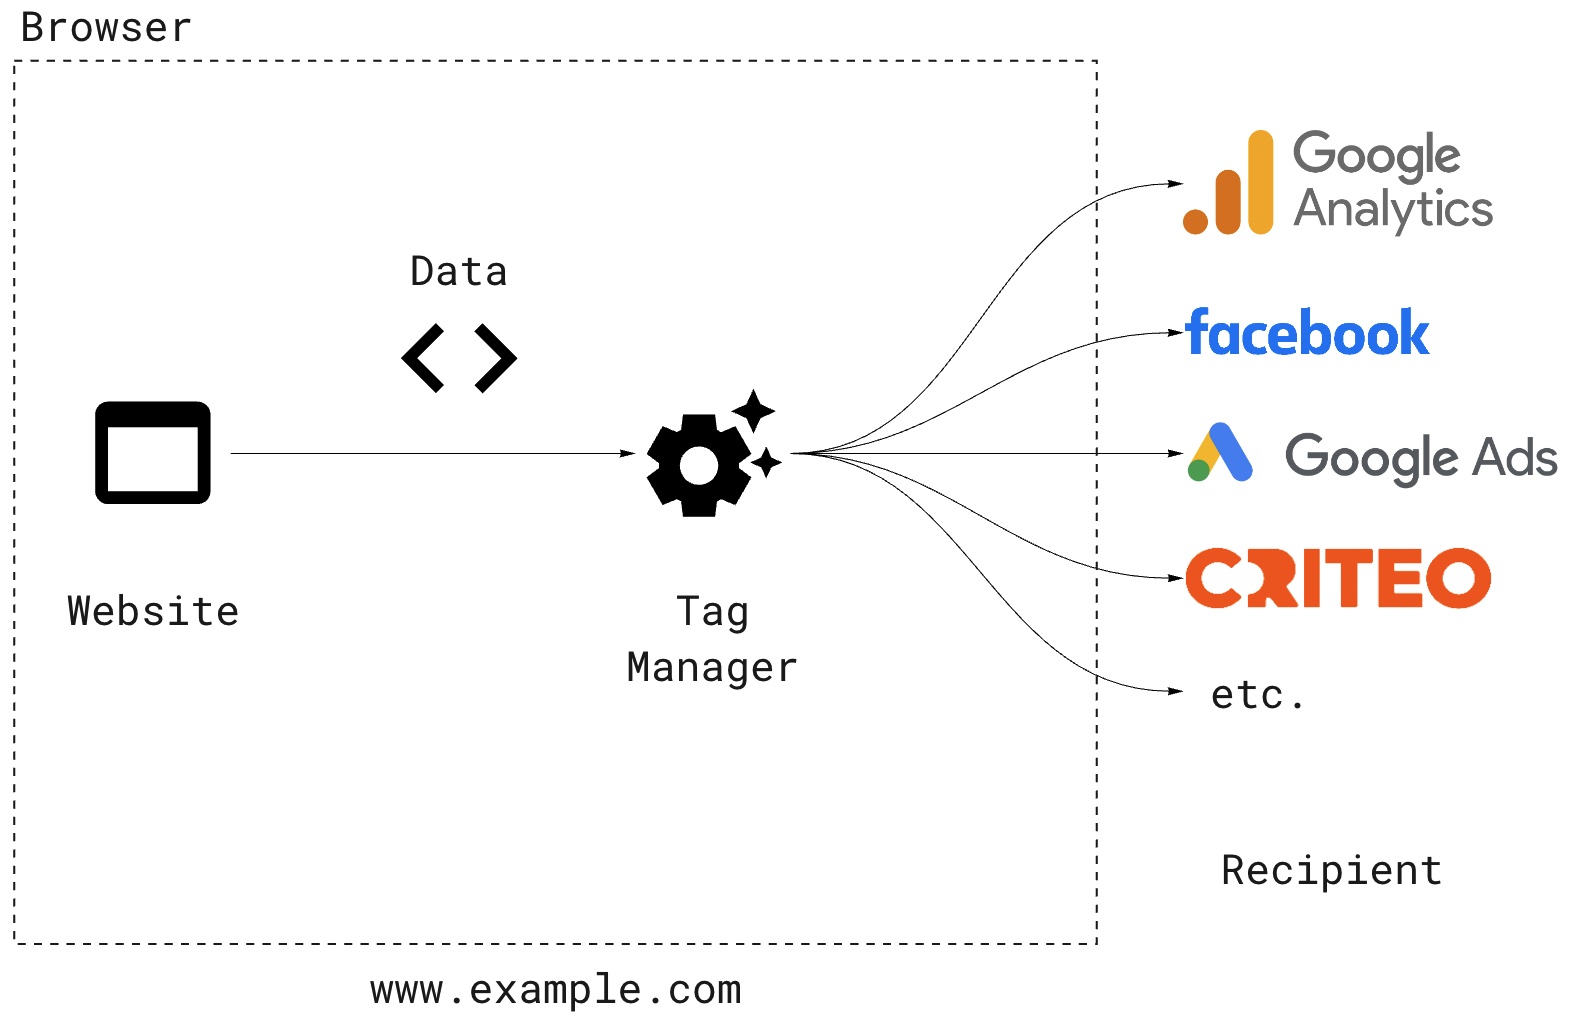 Diagram showing data flow directly from the browser to the ultimate recipient, such as Google Analytics, Meta or Criteo